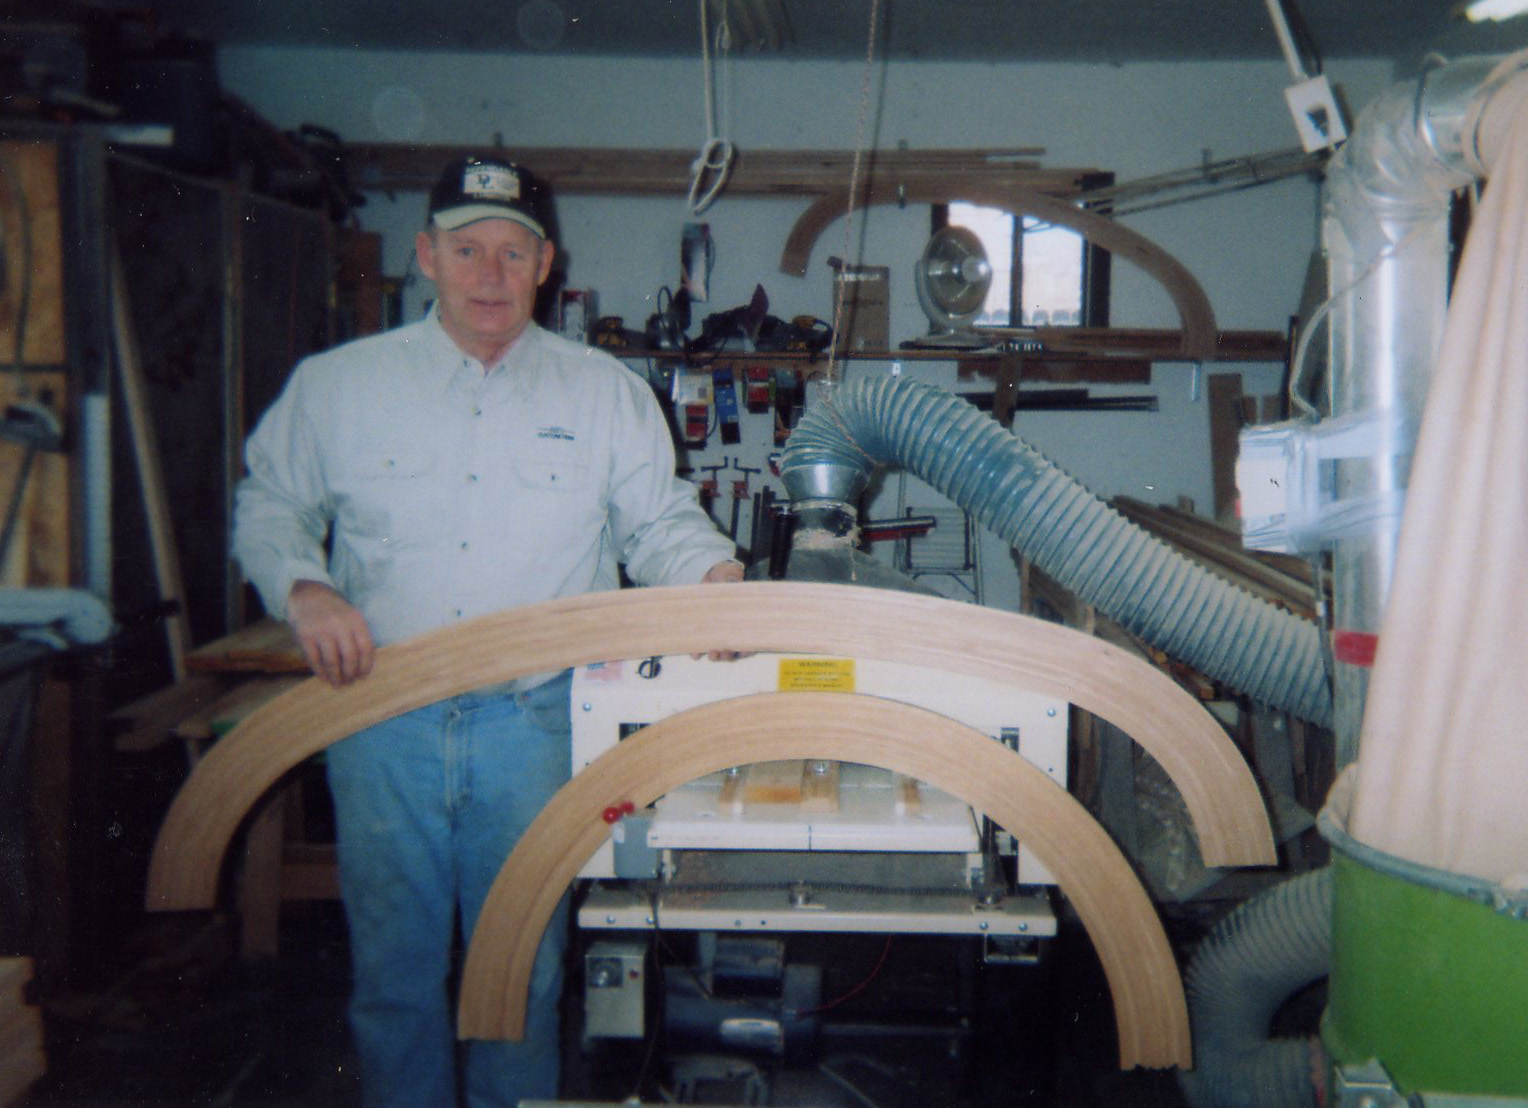 Among many other things in his woodworking business, Bill Grom makes 